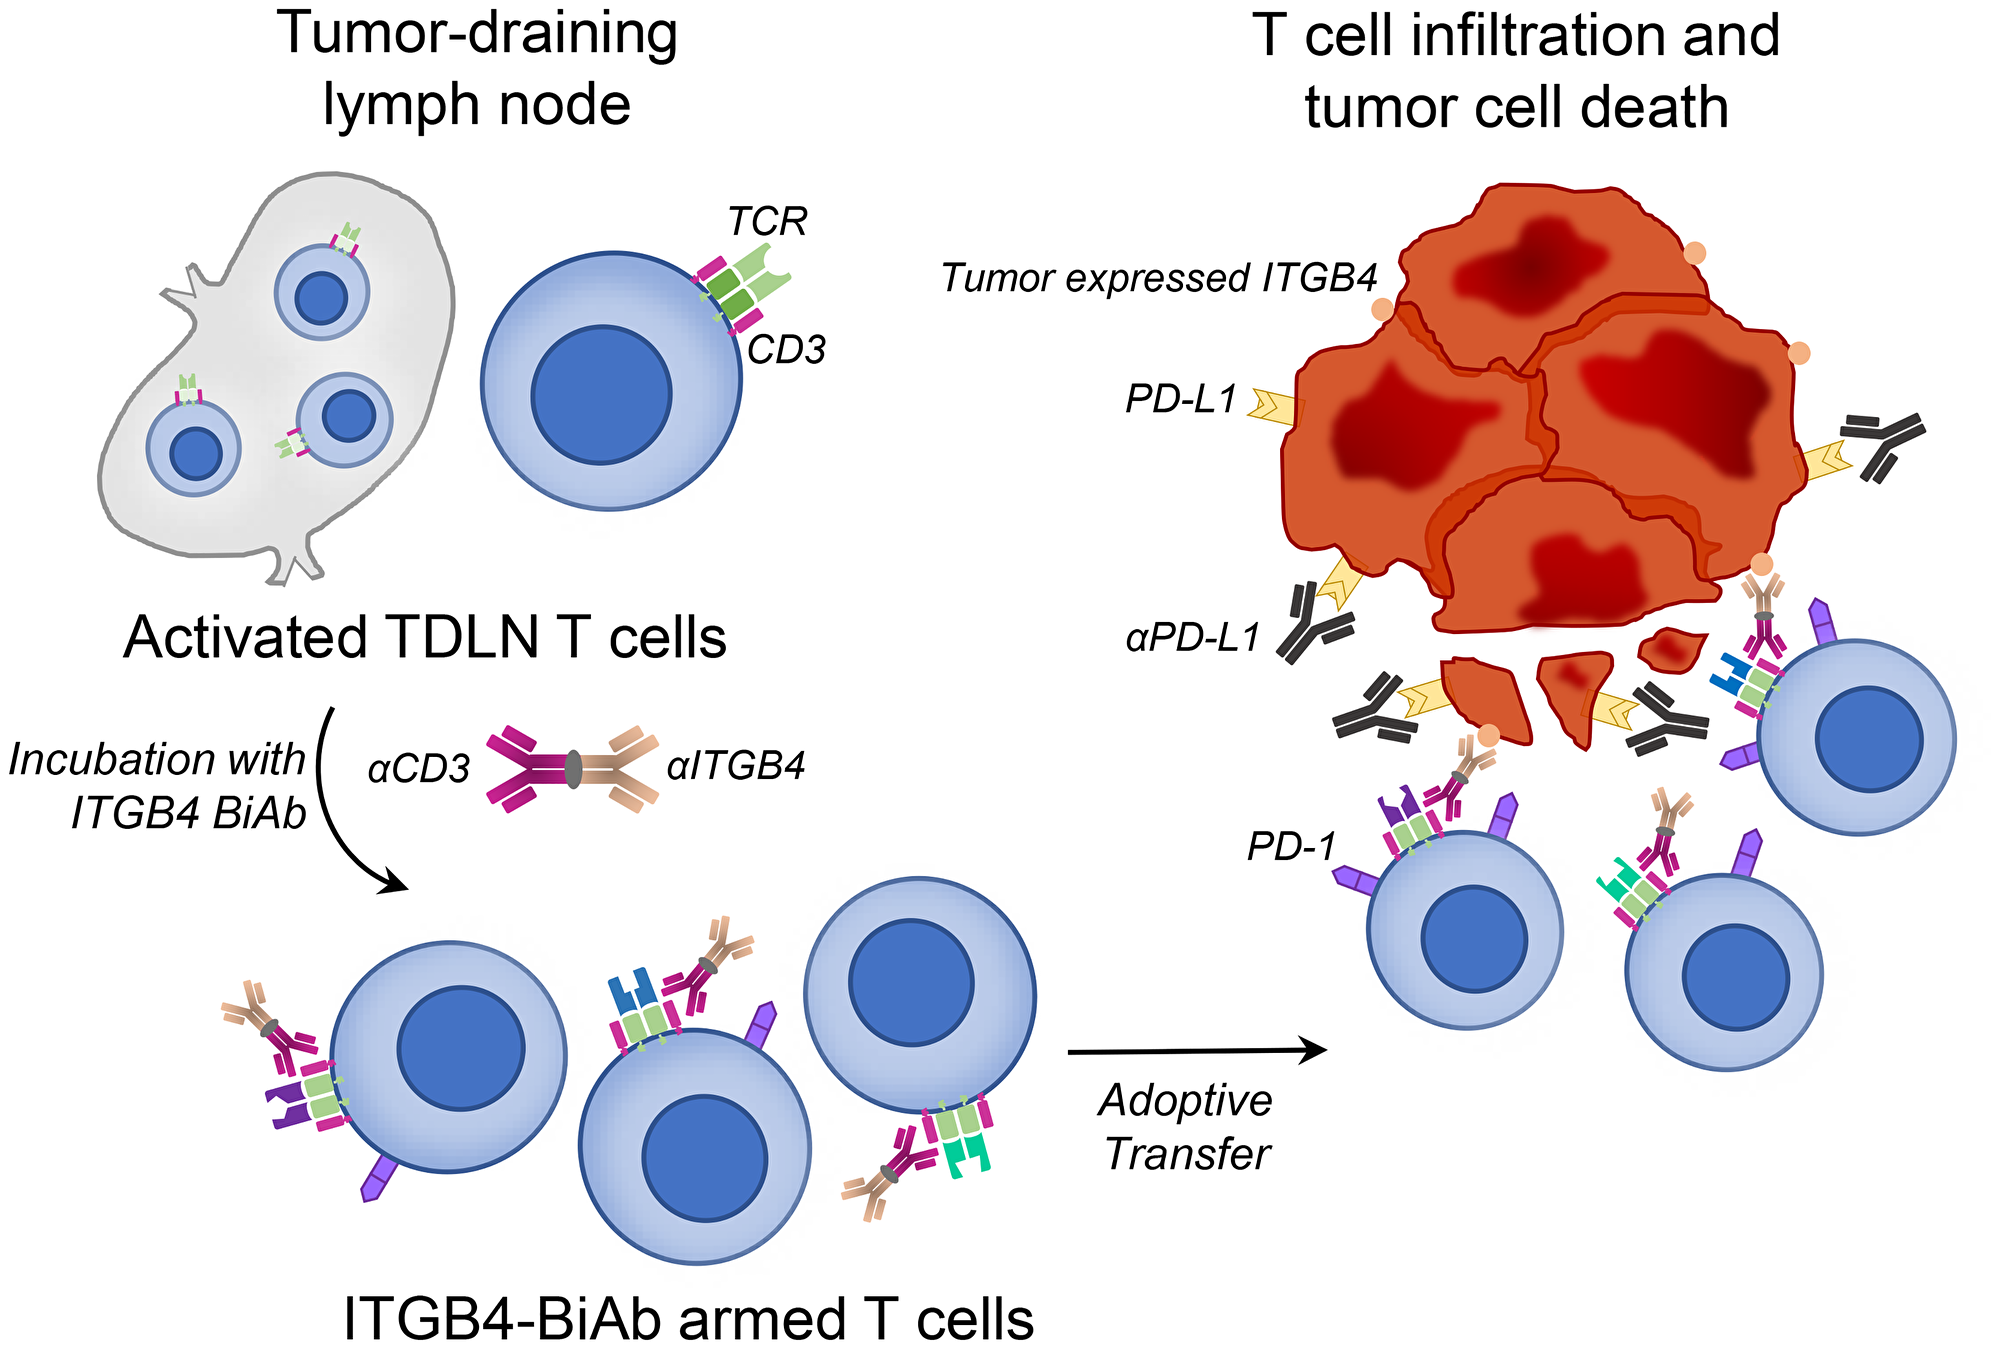 Adoptive transfer of ITGB4-BiAb armed T cells, combined with αPD-L1 administration, results in killing of ITGB4 expressing cancer stem cells and differentiated tumor cells.